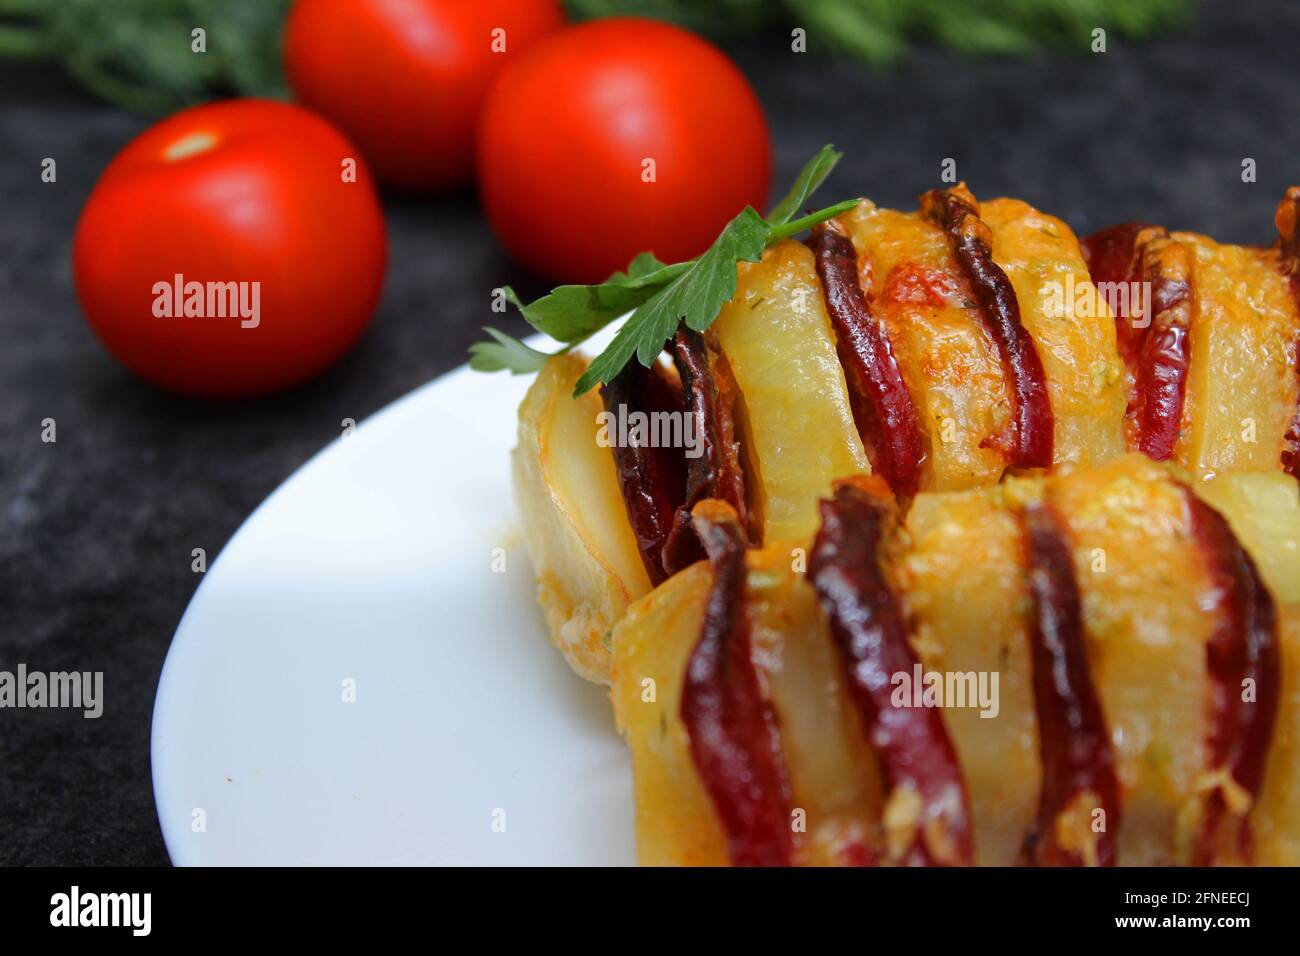 potato stuffed with salami, cheese, ketchup, garlic and herbs. Baked whole potatoes is sliced and stuffed. Traditional swedish recipe Stock Photo